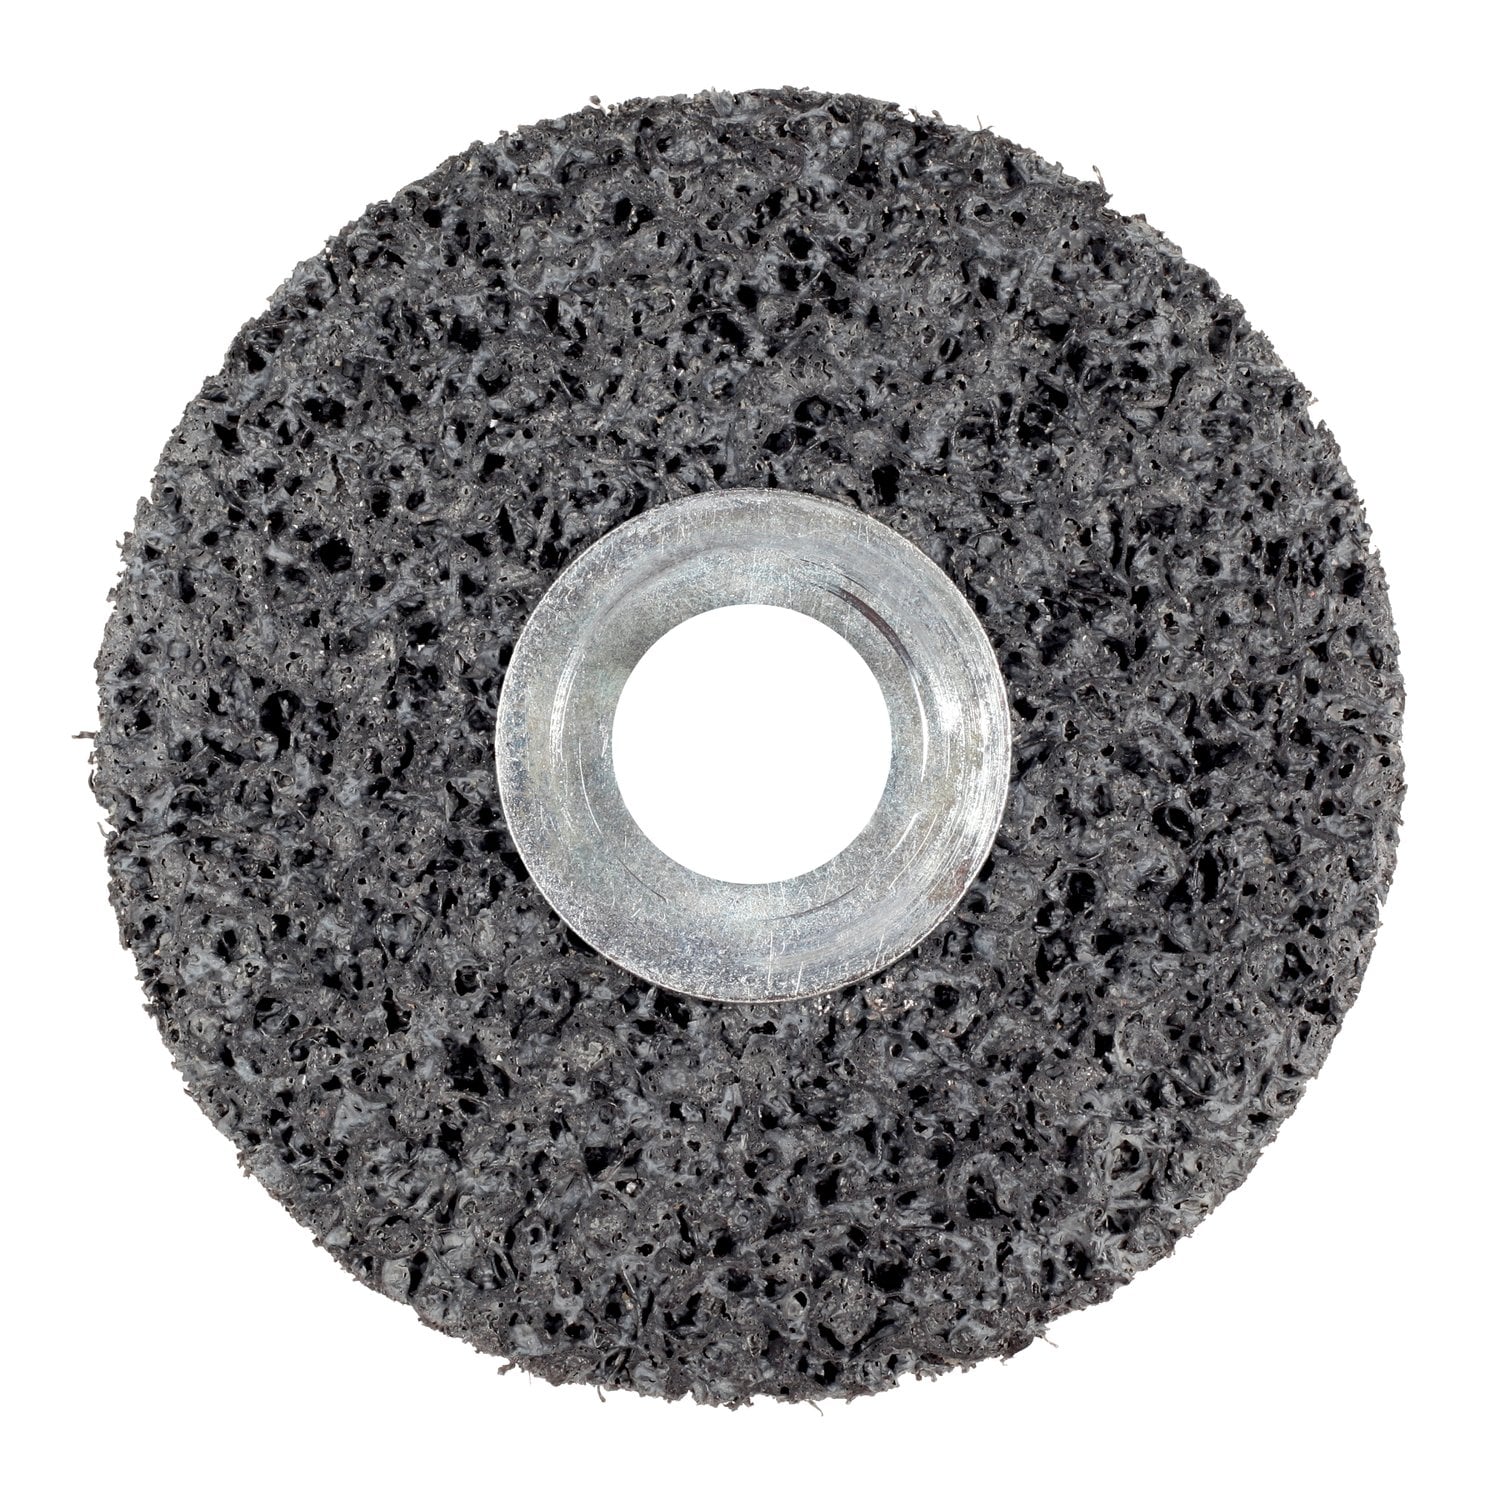 7100012497 - Scotch-Brite Clean and Strip Unitized Wheel, CS-UW, 7S Extra Coarse,
MISC x 1 in x MISC, Config